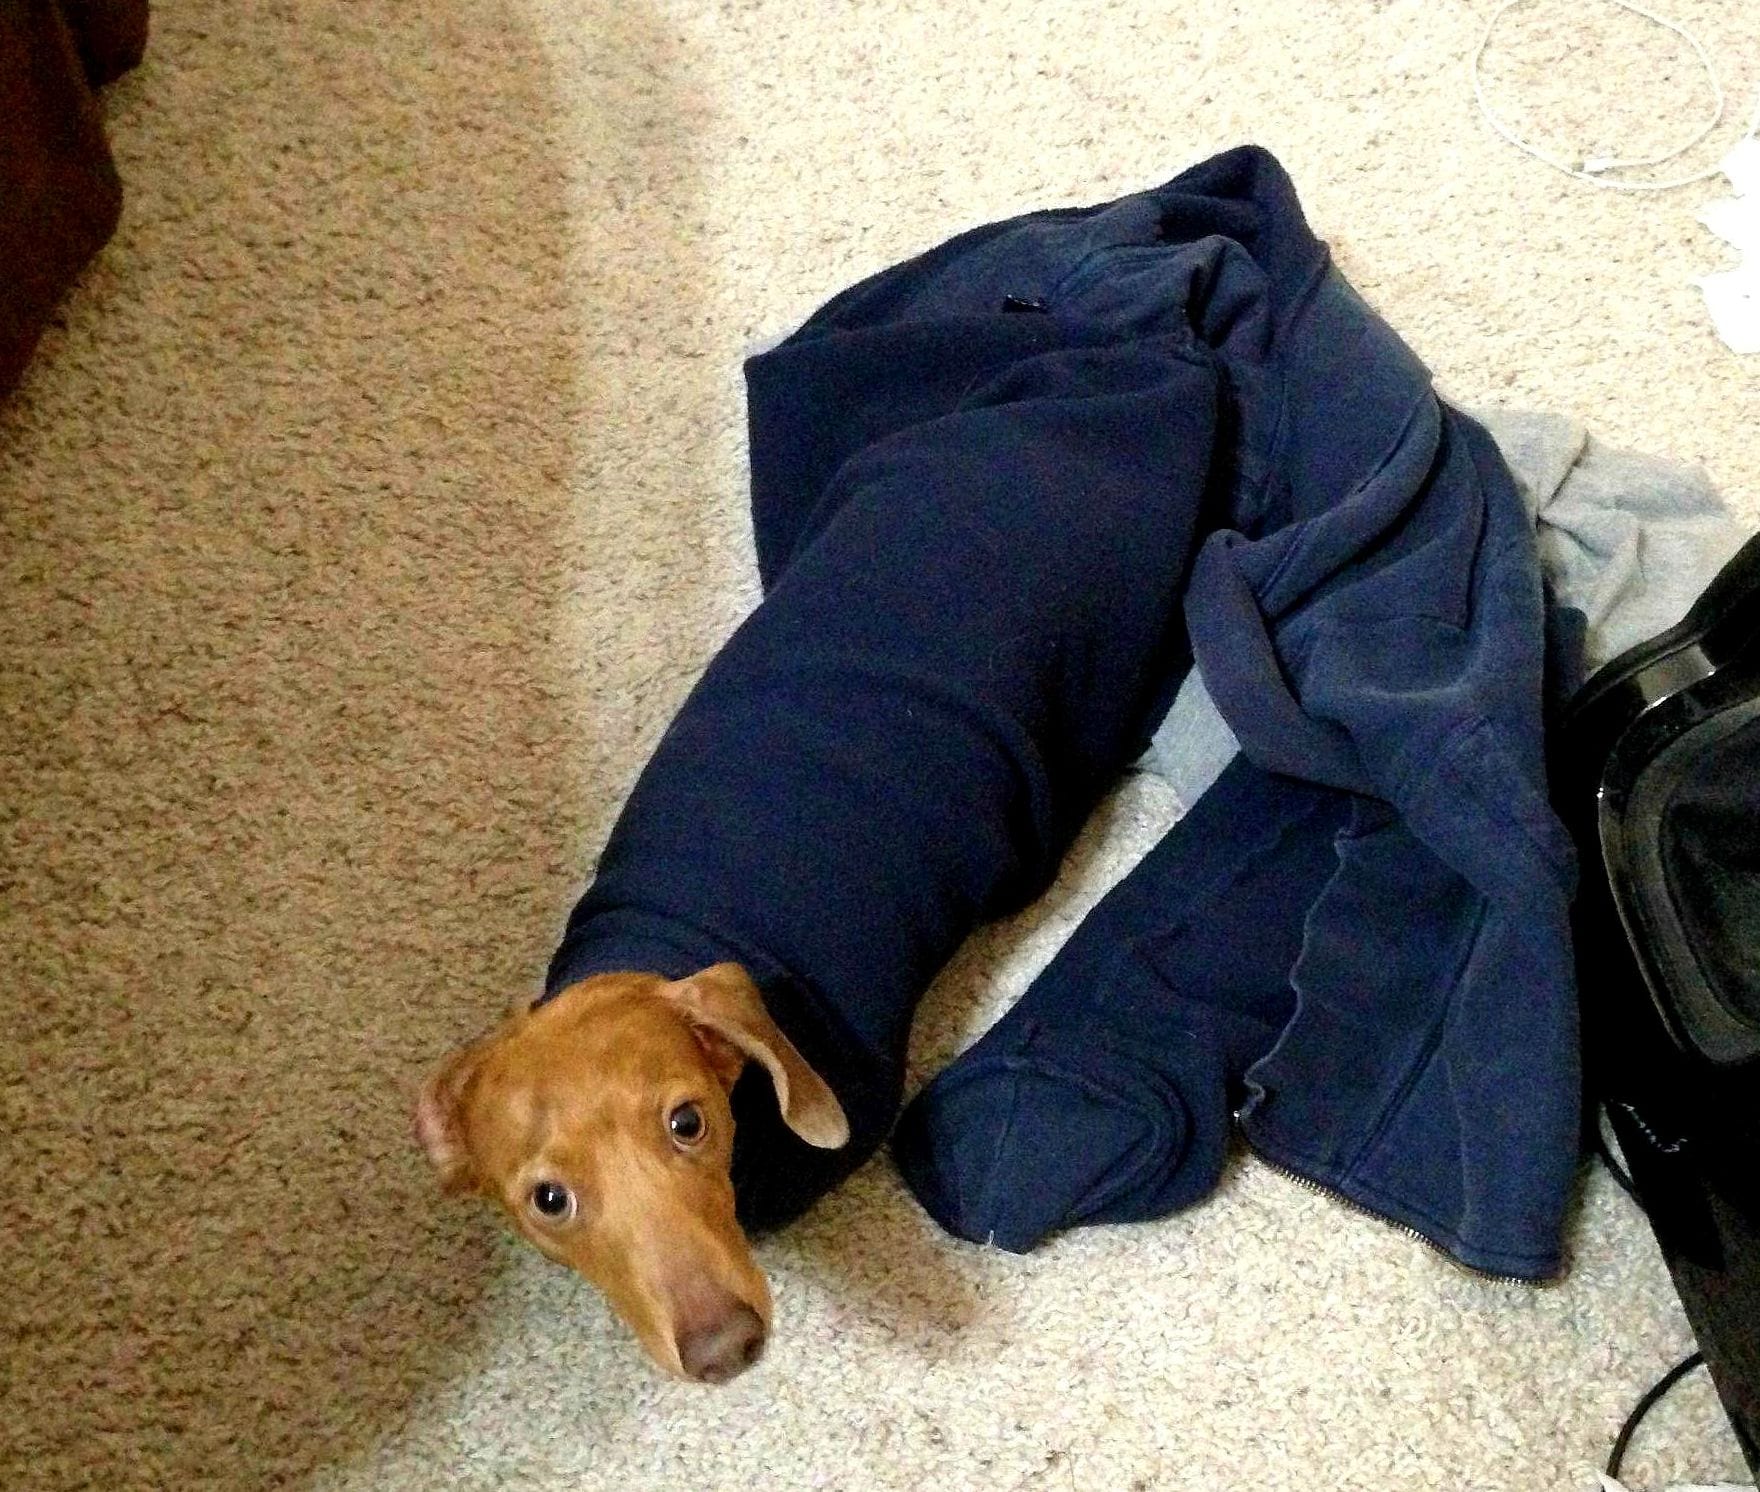 A Dachshund with its body wrapped in a shirt while standing on the floor